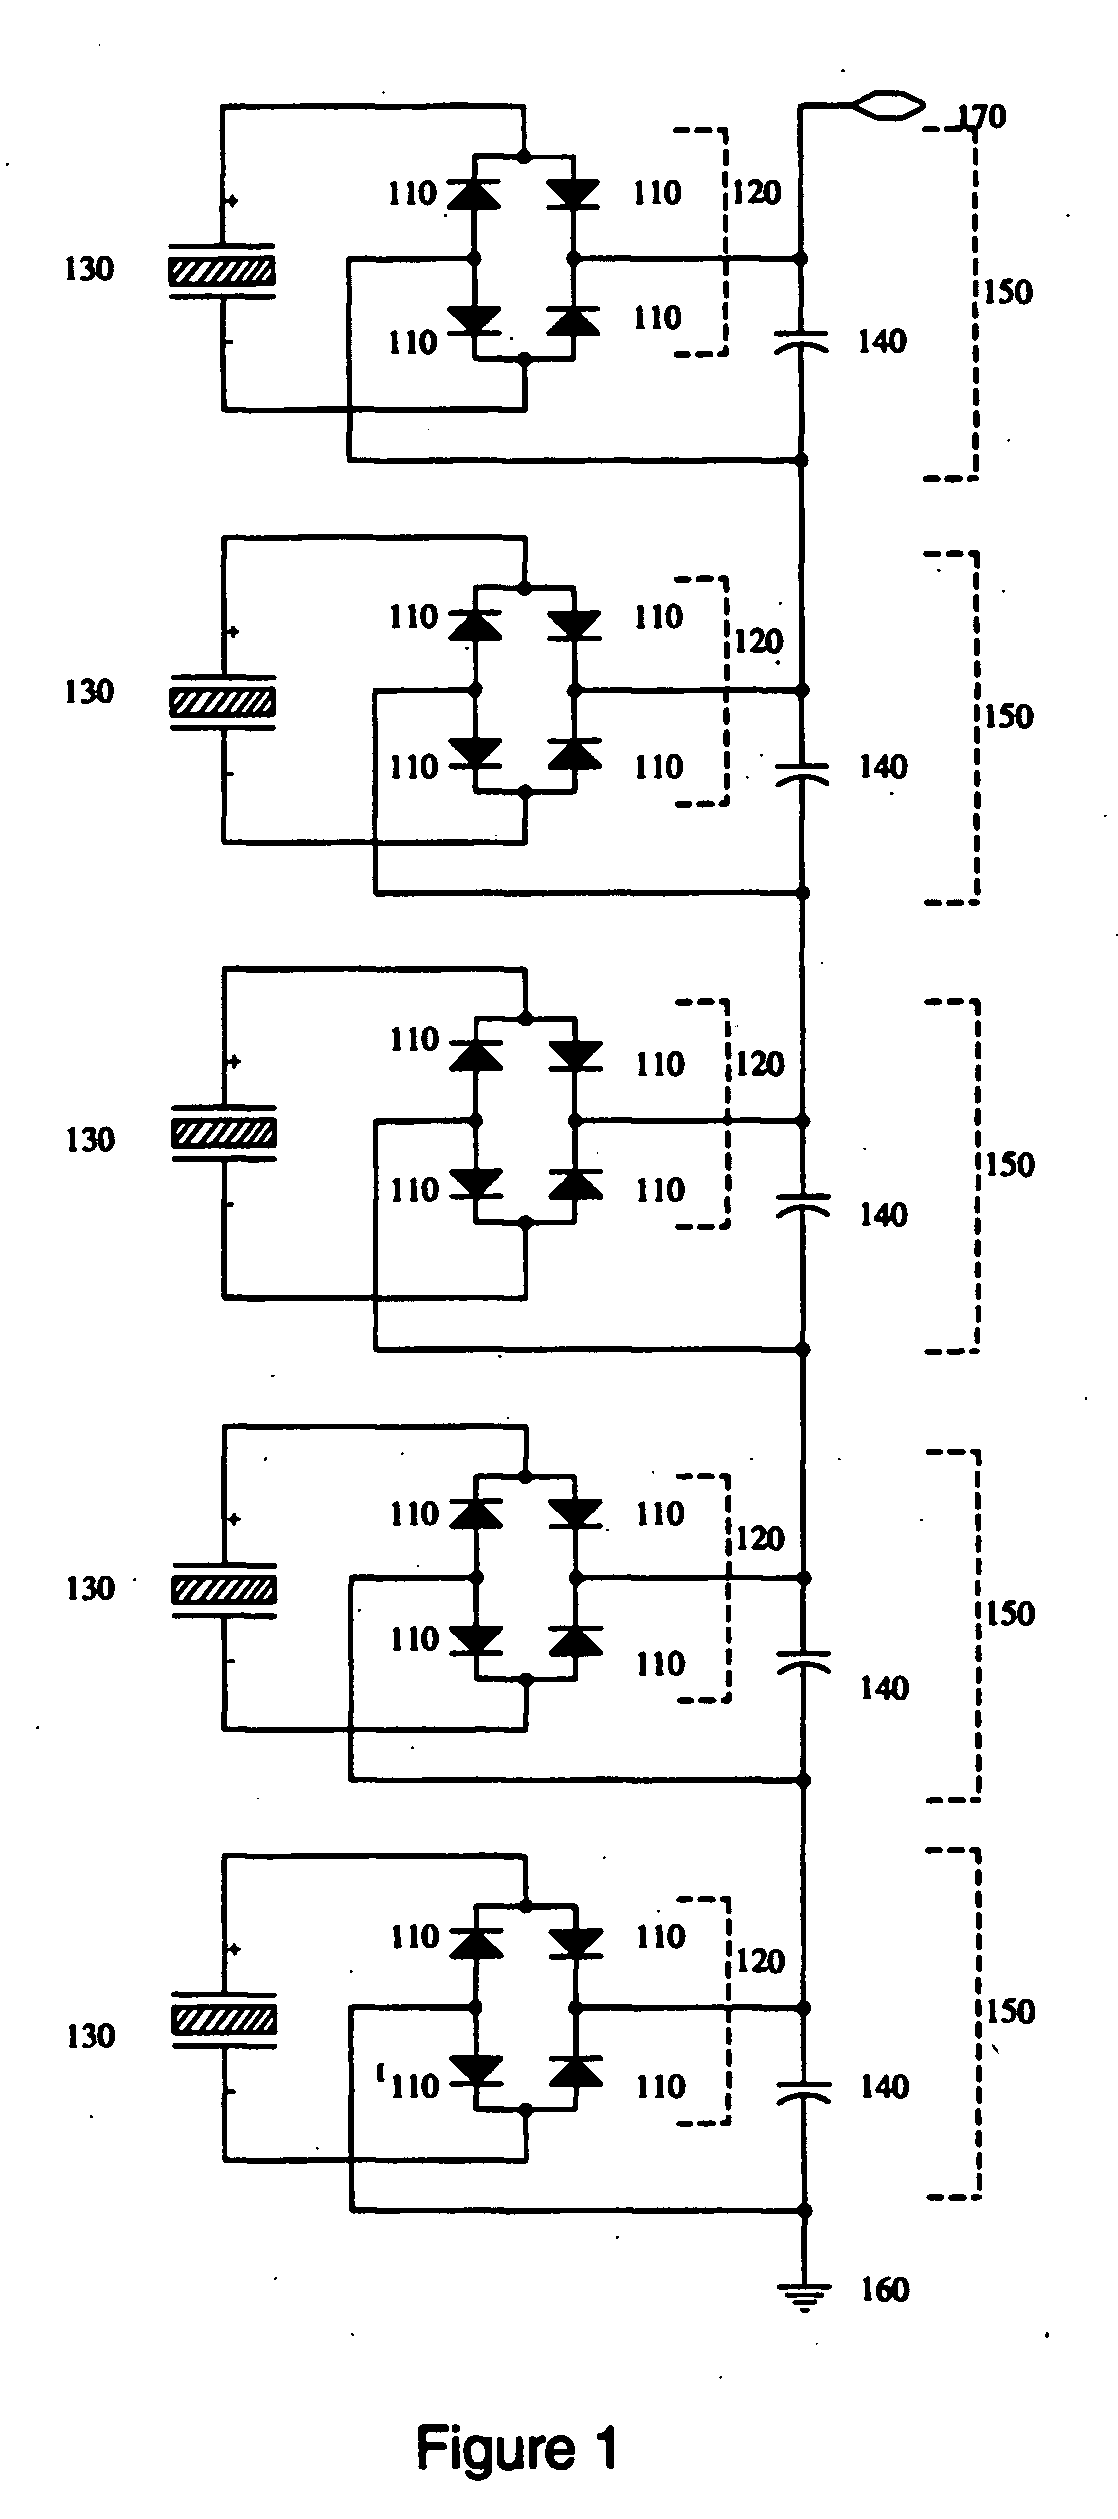 Method and apparatus for a high output sensor system